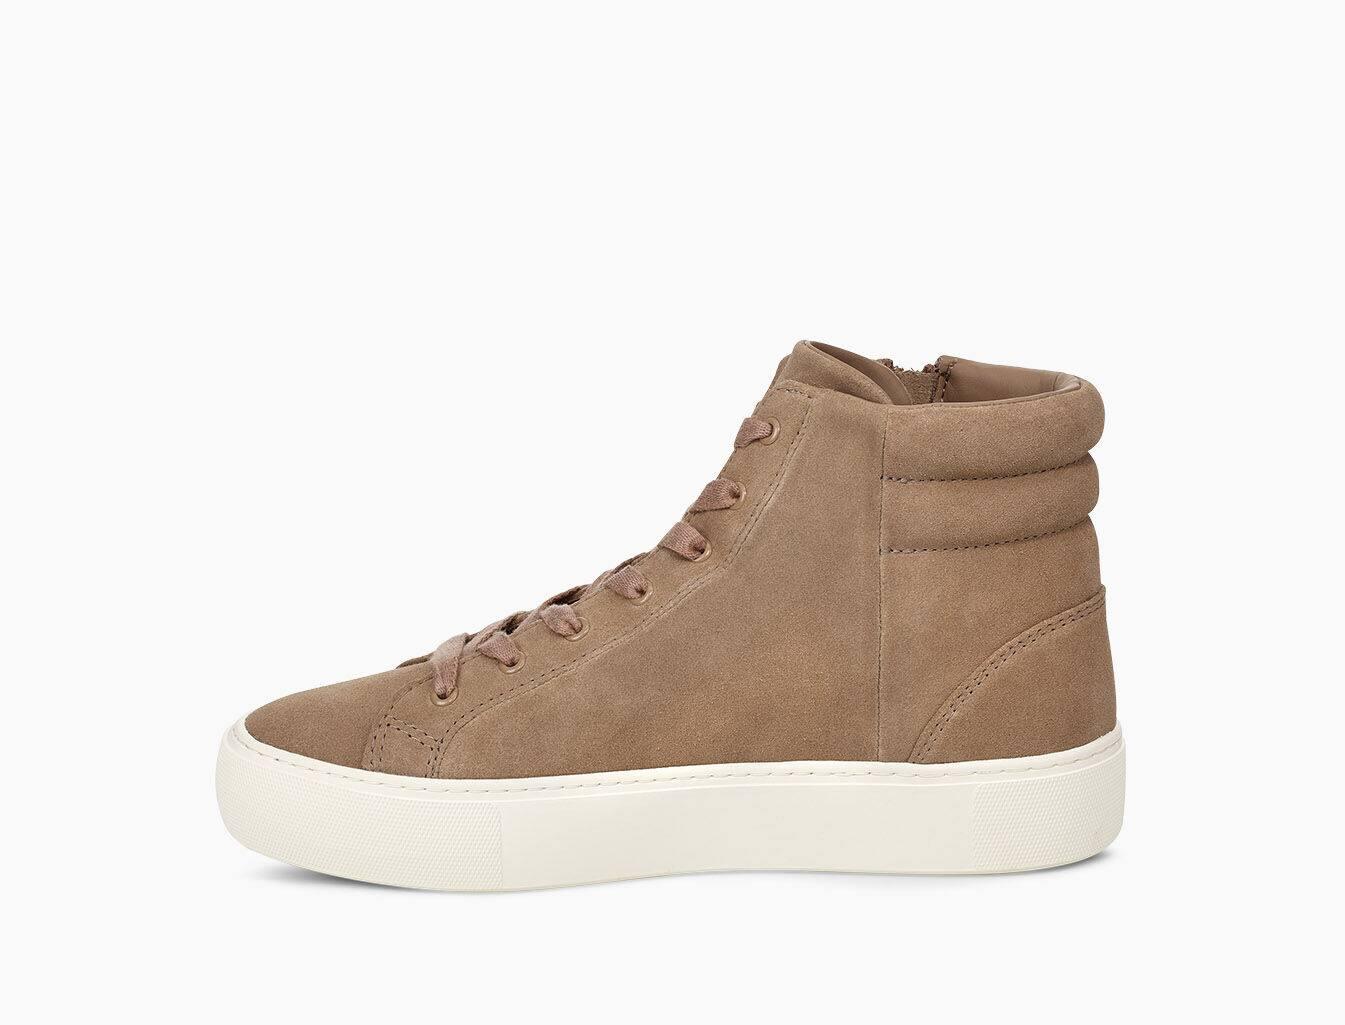 UGG Olli Leather High-top Sneakers in Brown - Save 54% - Lyst